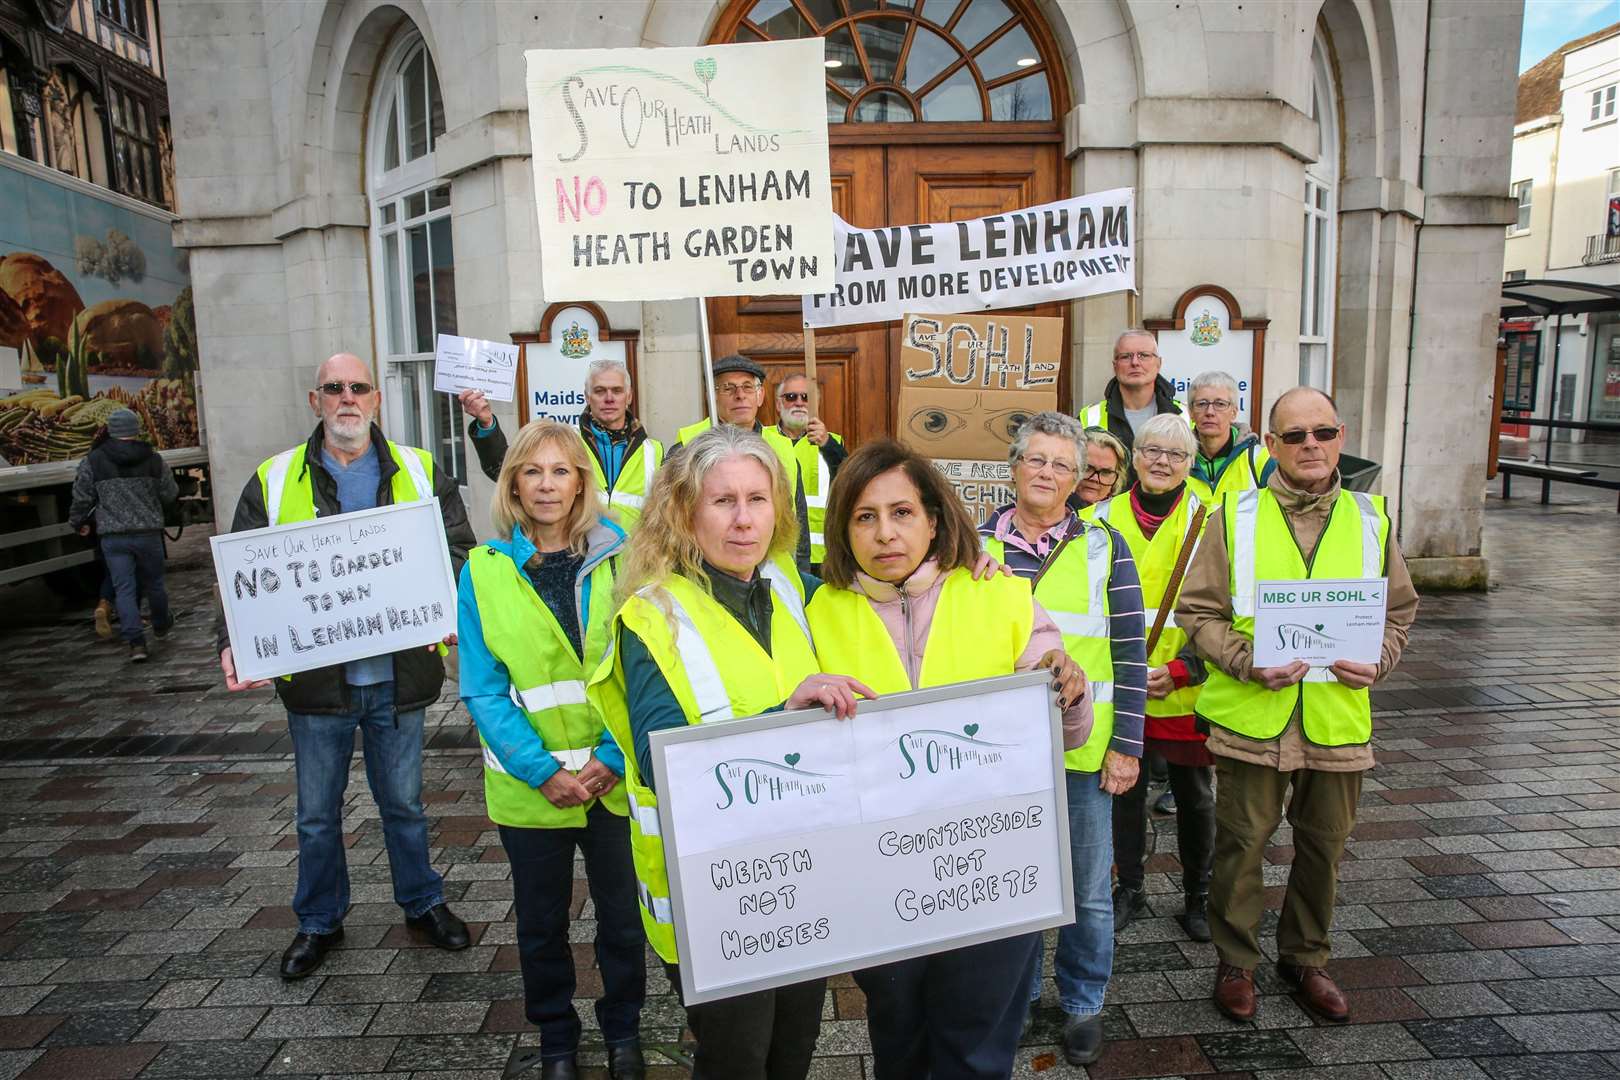 Protest march against MBC's 'Call for Sites' scheme which includes proposals for 5,000 homes in Lenham. Kate Hammond and Afsaneh Smith with other protestors. Picture: Matthew Walker